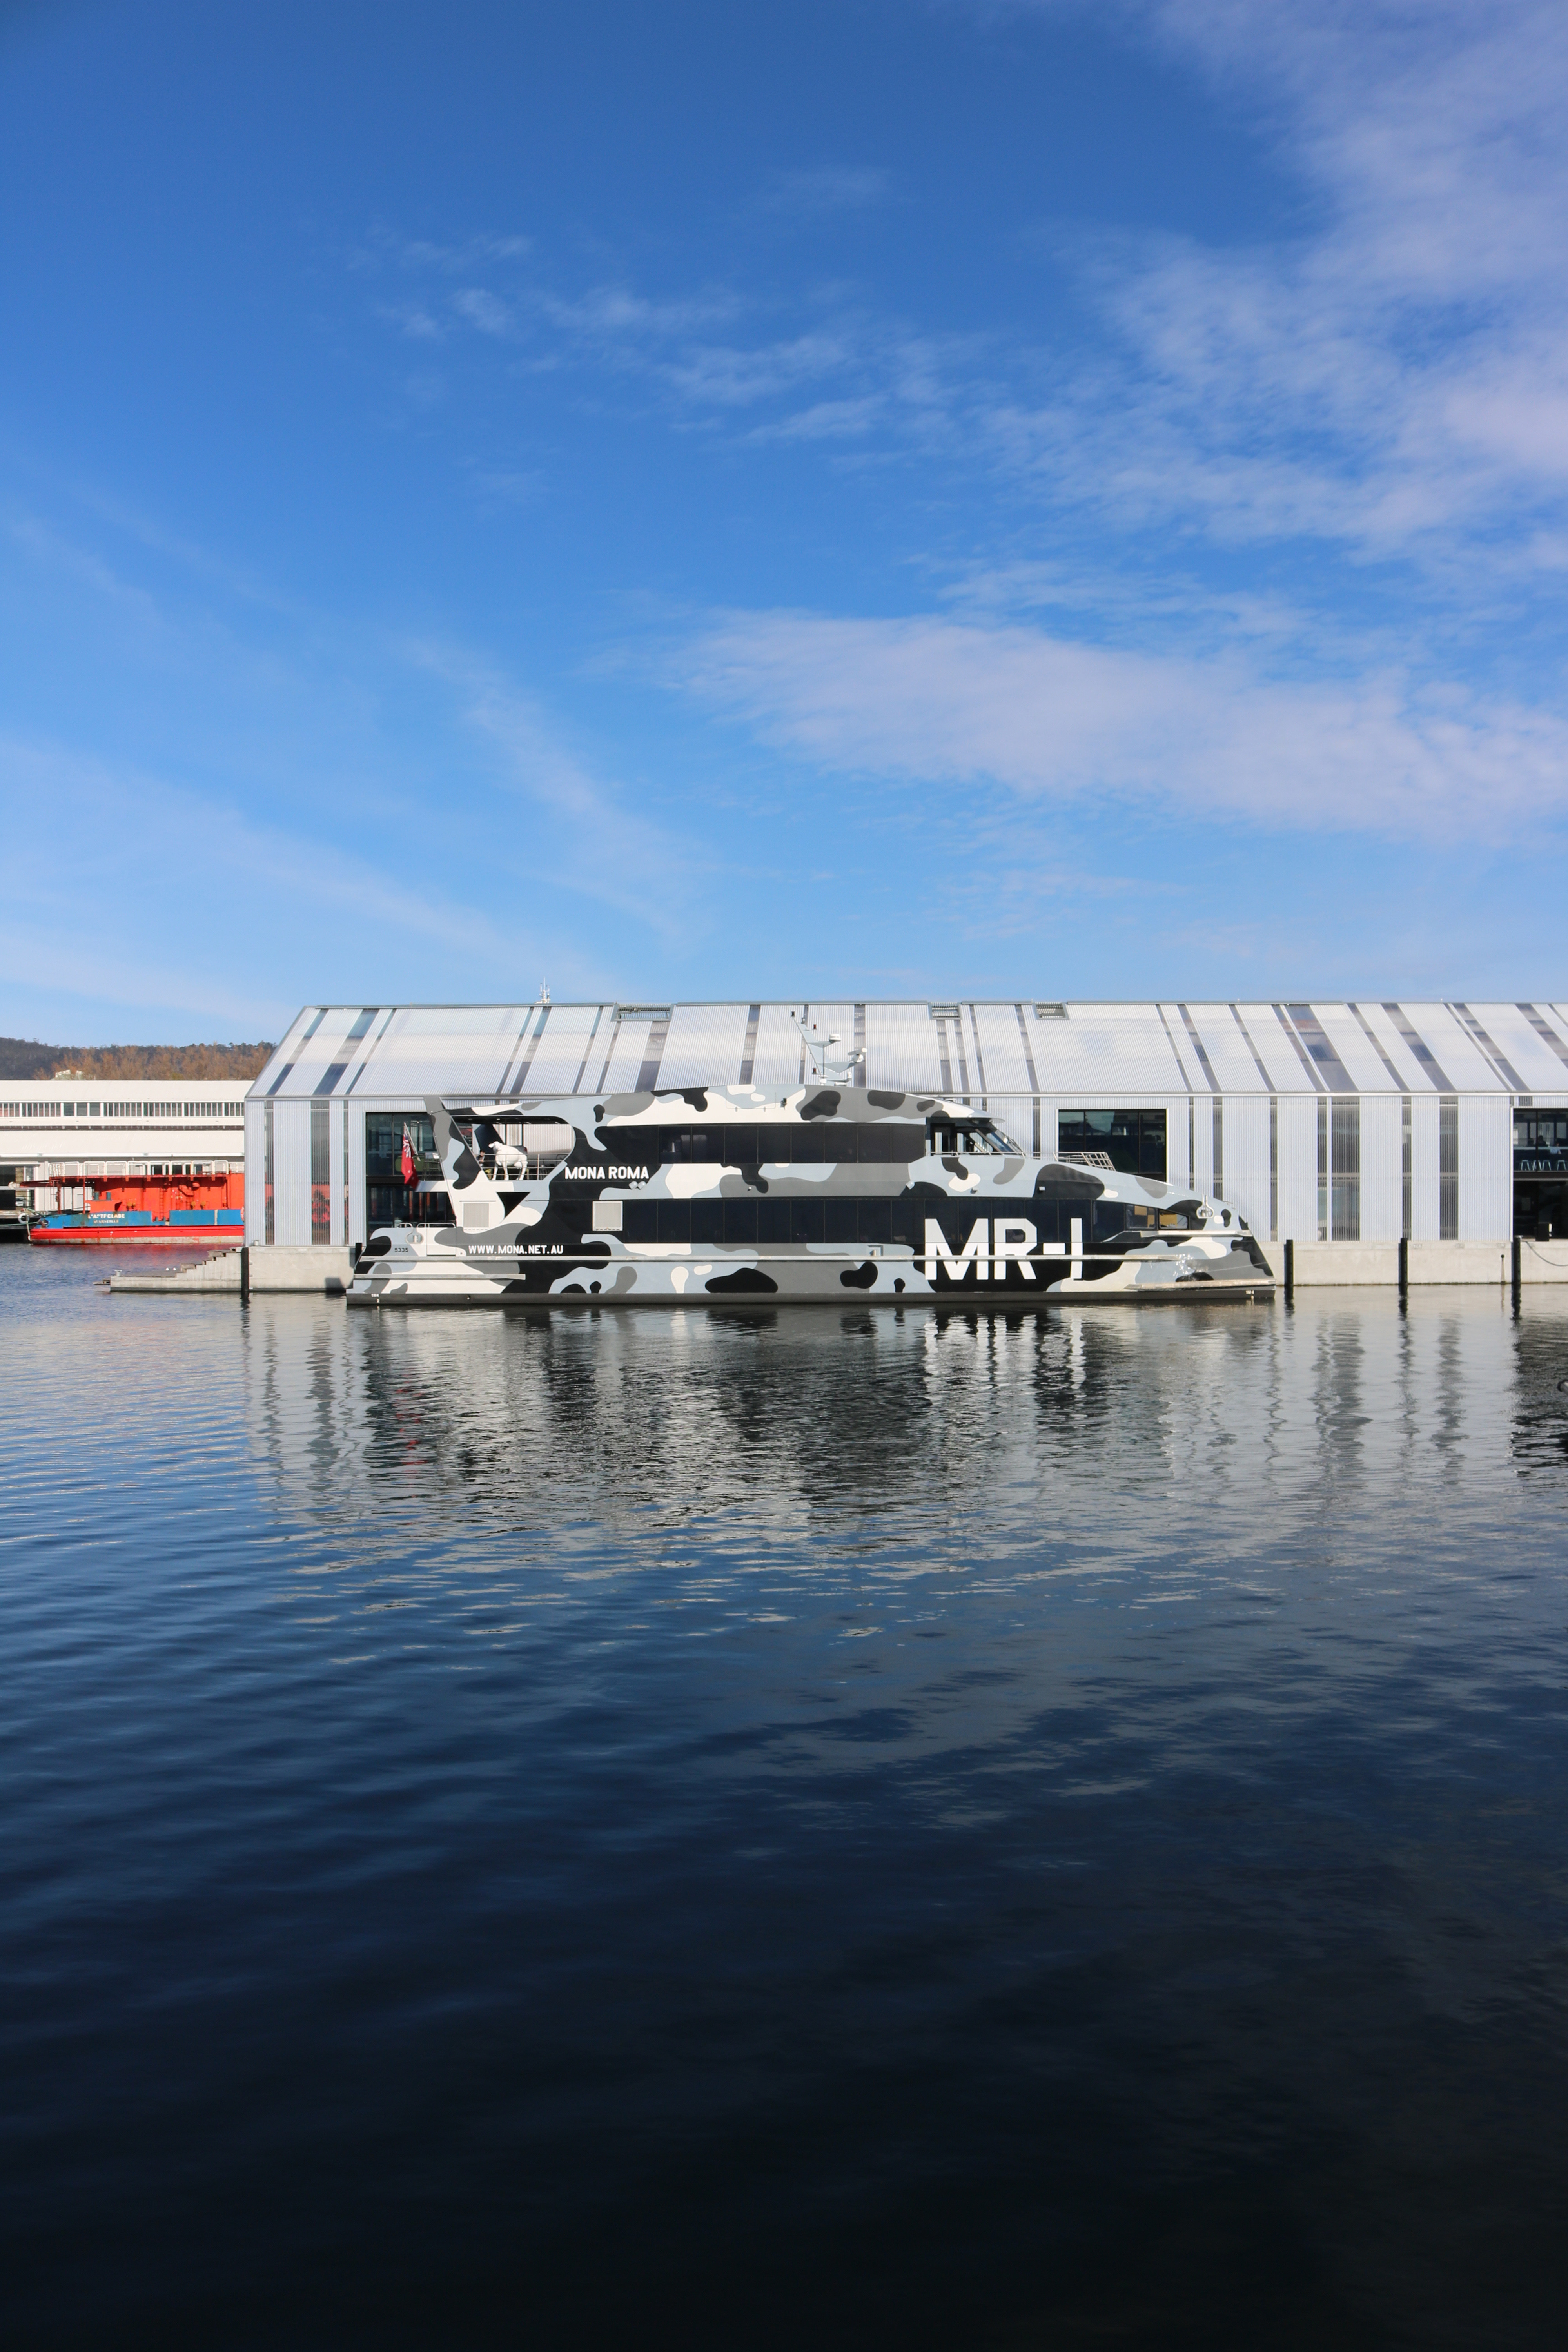 MONA Roma 1, a boat designed by makers Incat and graphic designer Damian Scott, parked up at Brooke Street Pier, Hobart